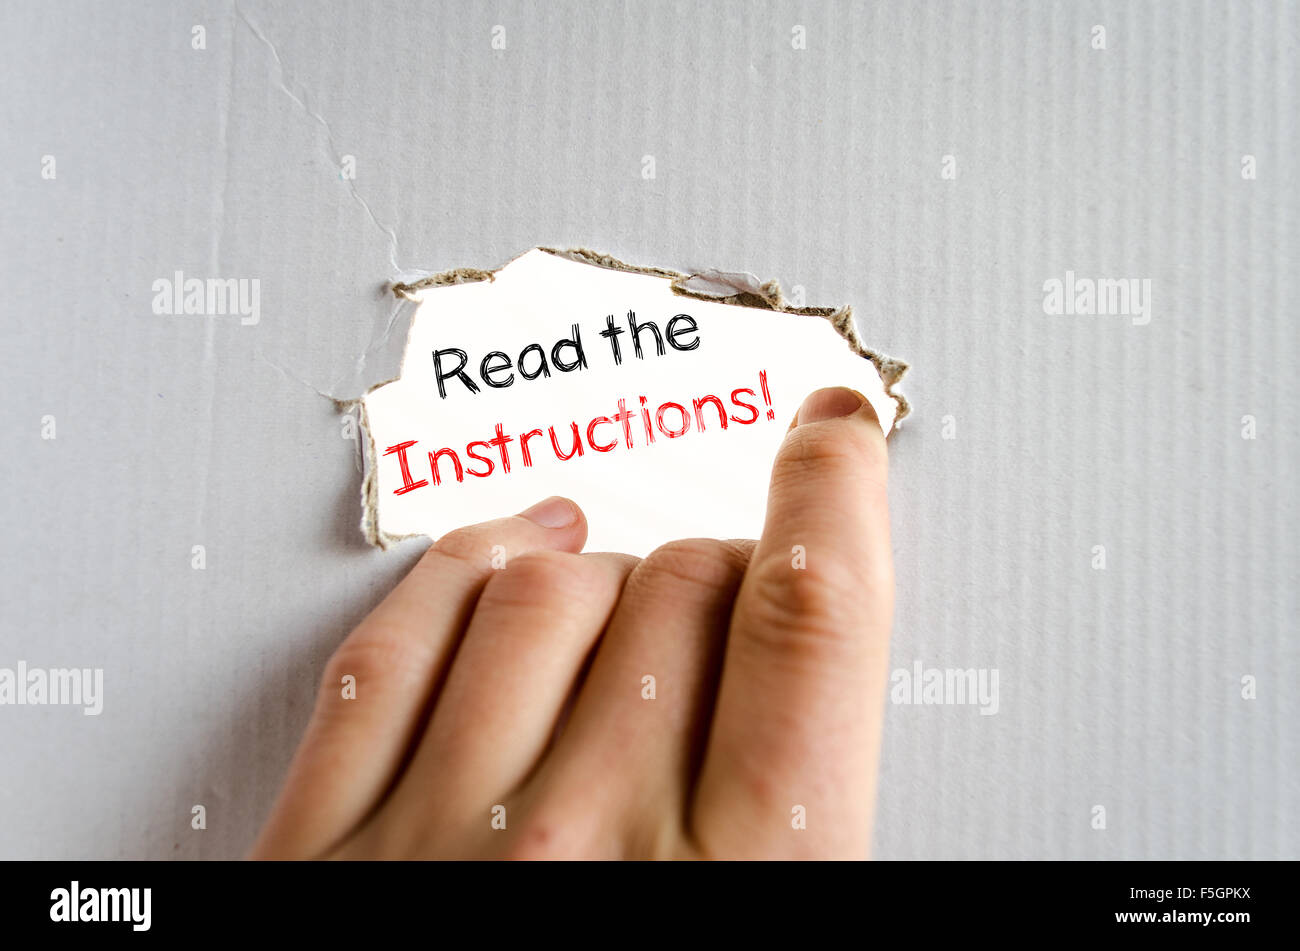 Read the instructions text concept isolated over white background Stock Photo